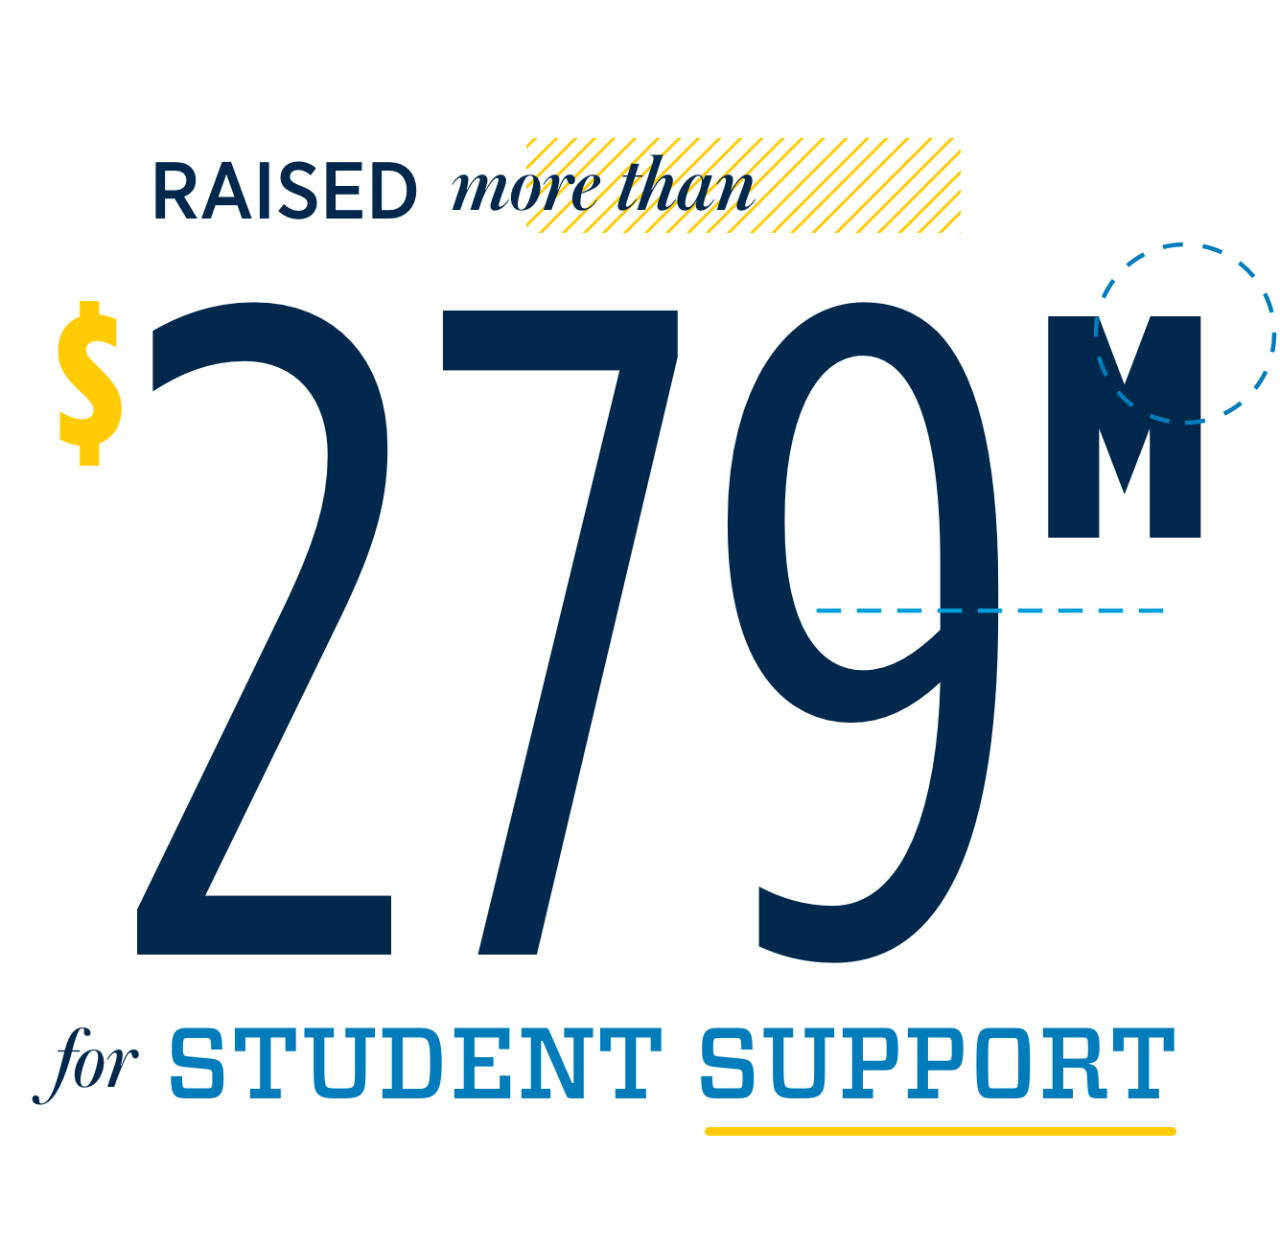 Raised more than $279 million for student support